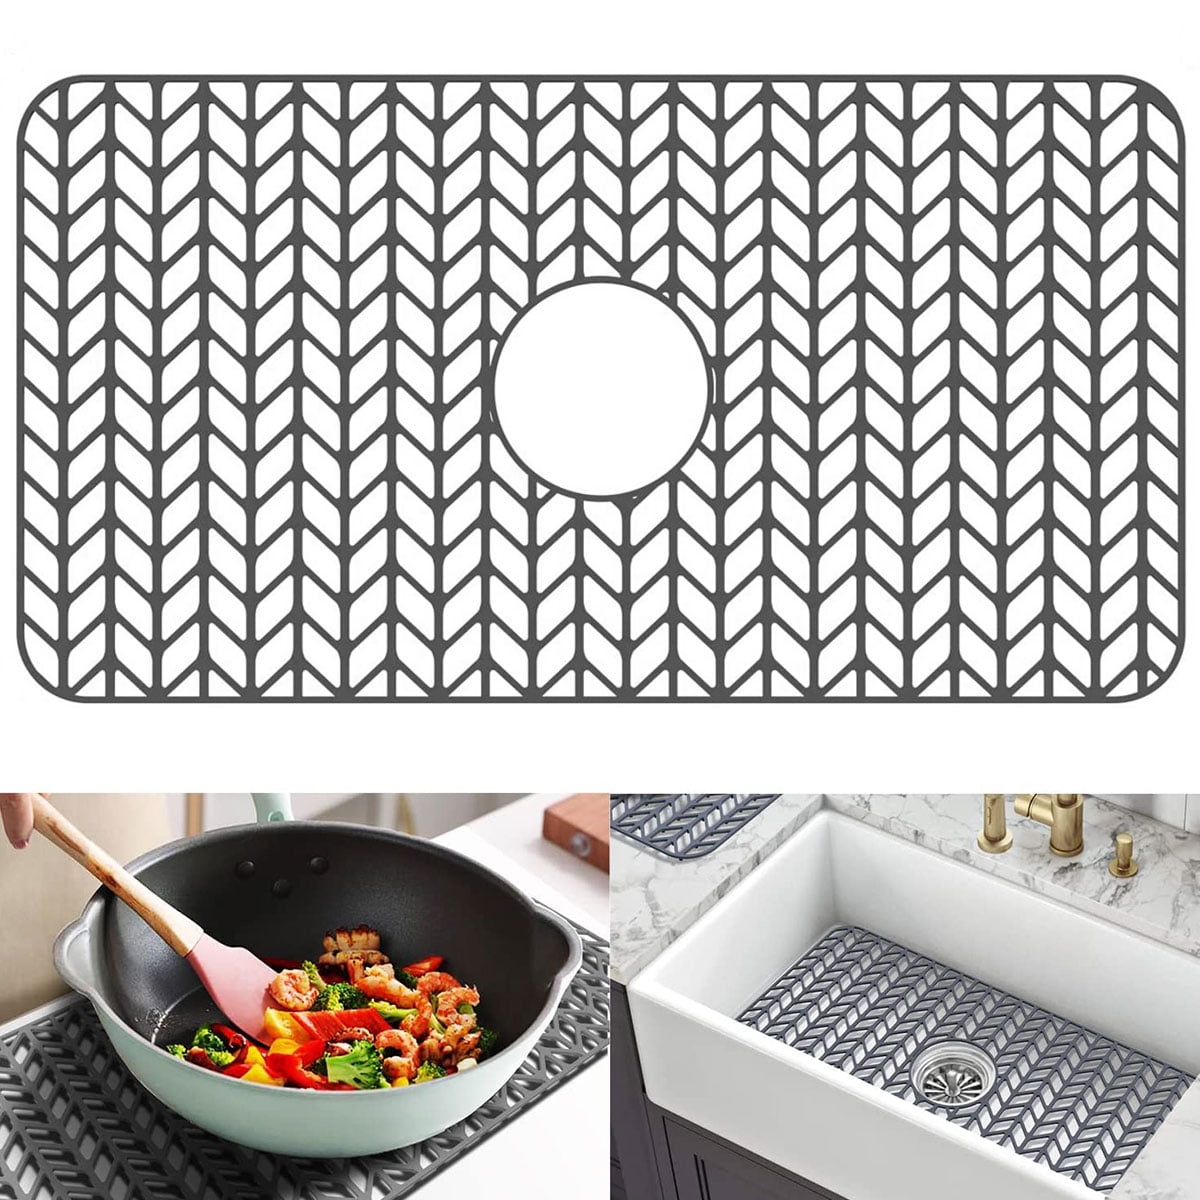 Cut to Fit Silicone Sink Mat for Bottom of Kitchen Sink Large 26.0